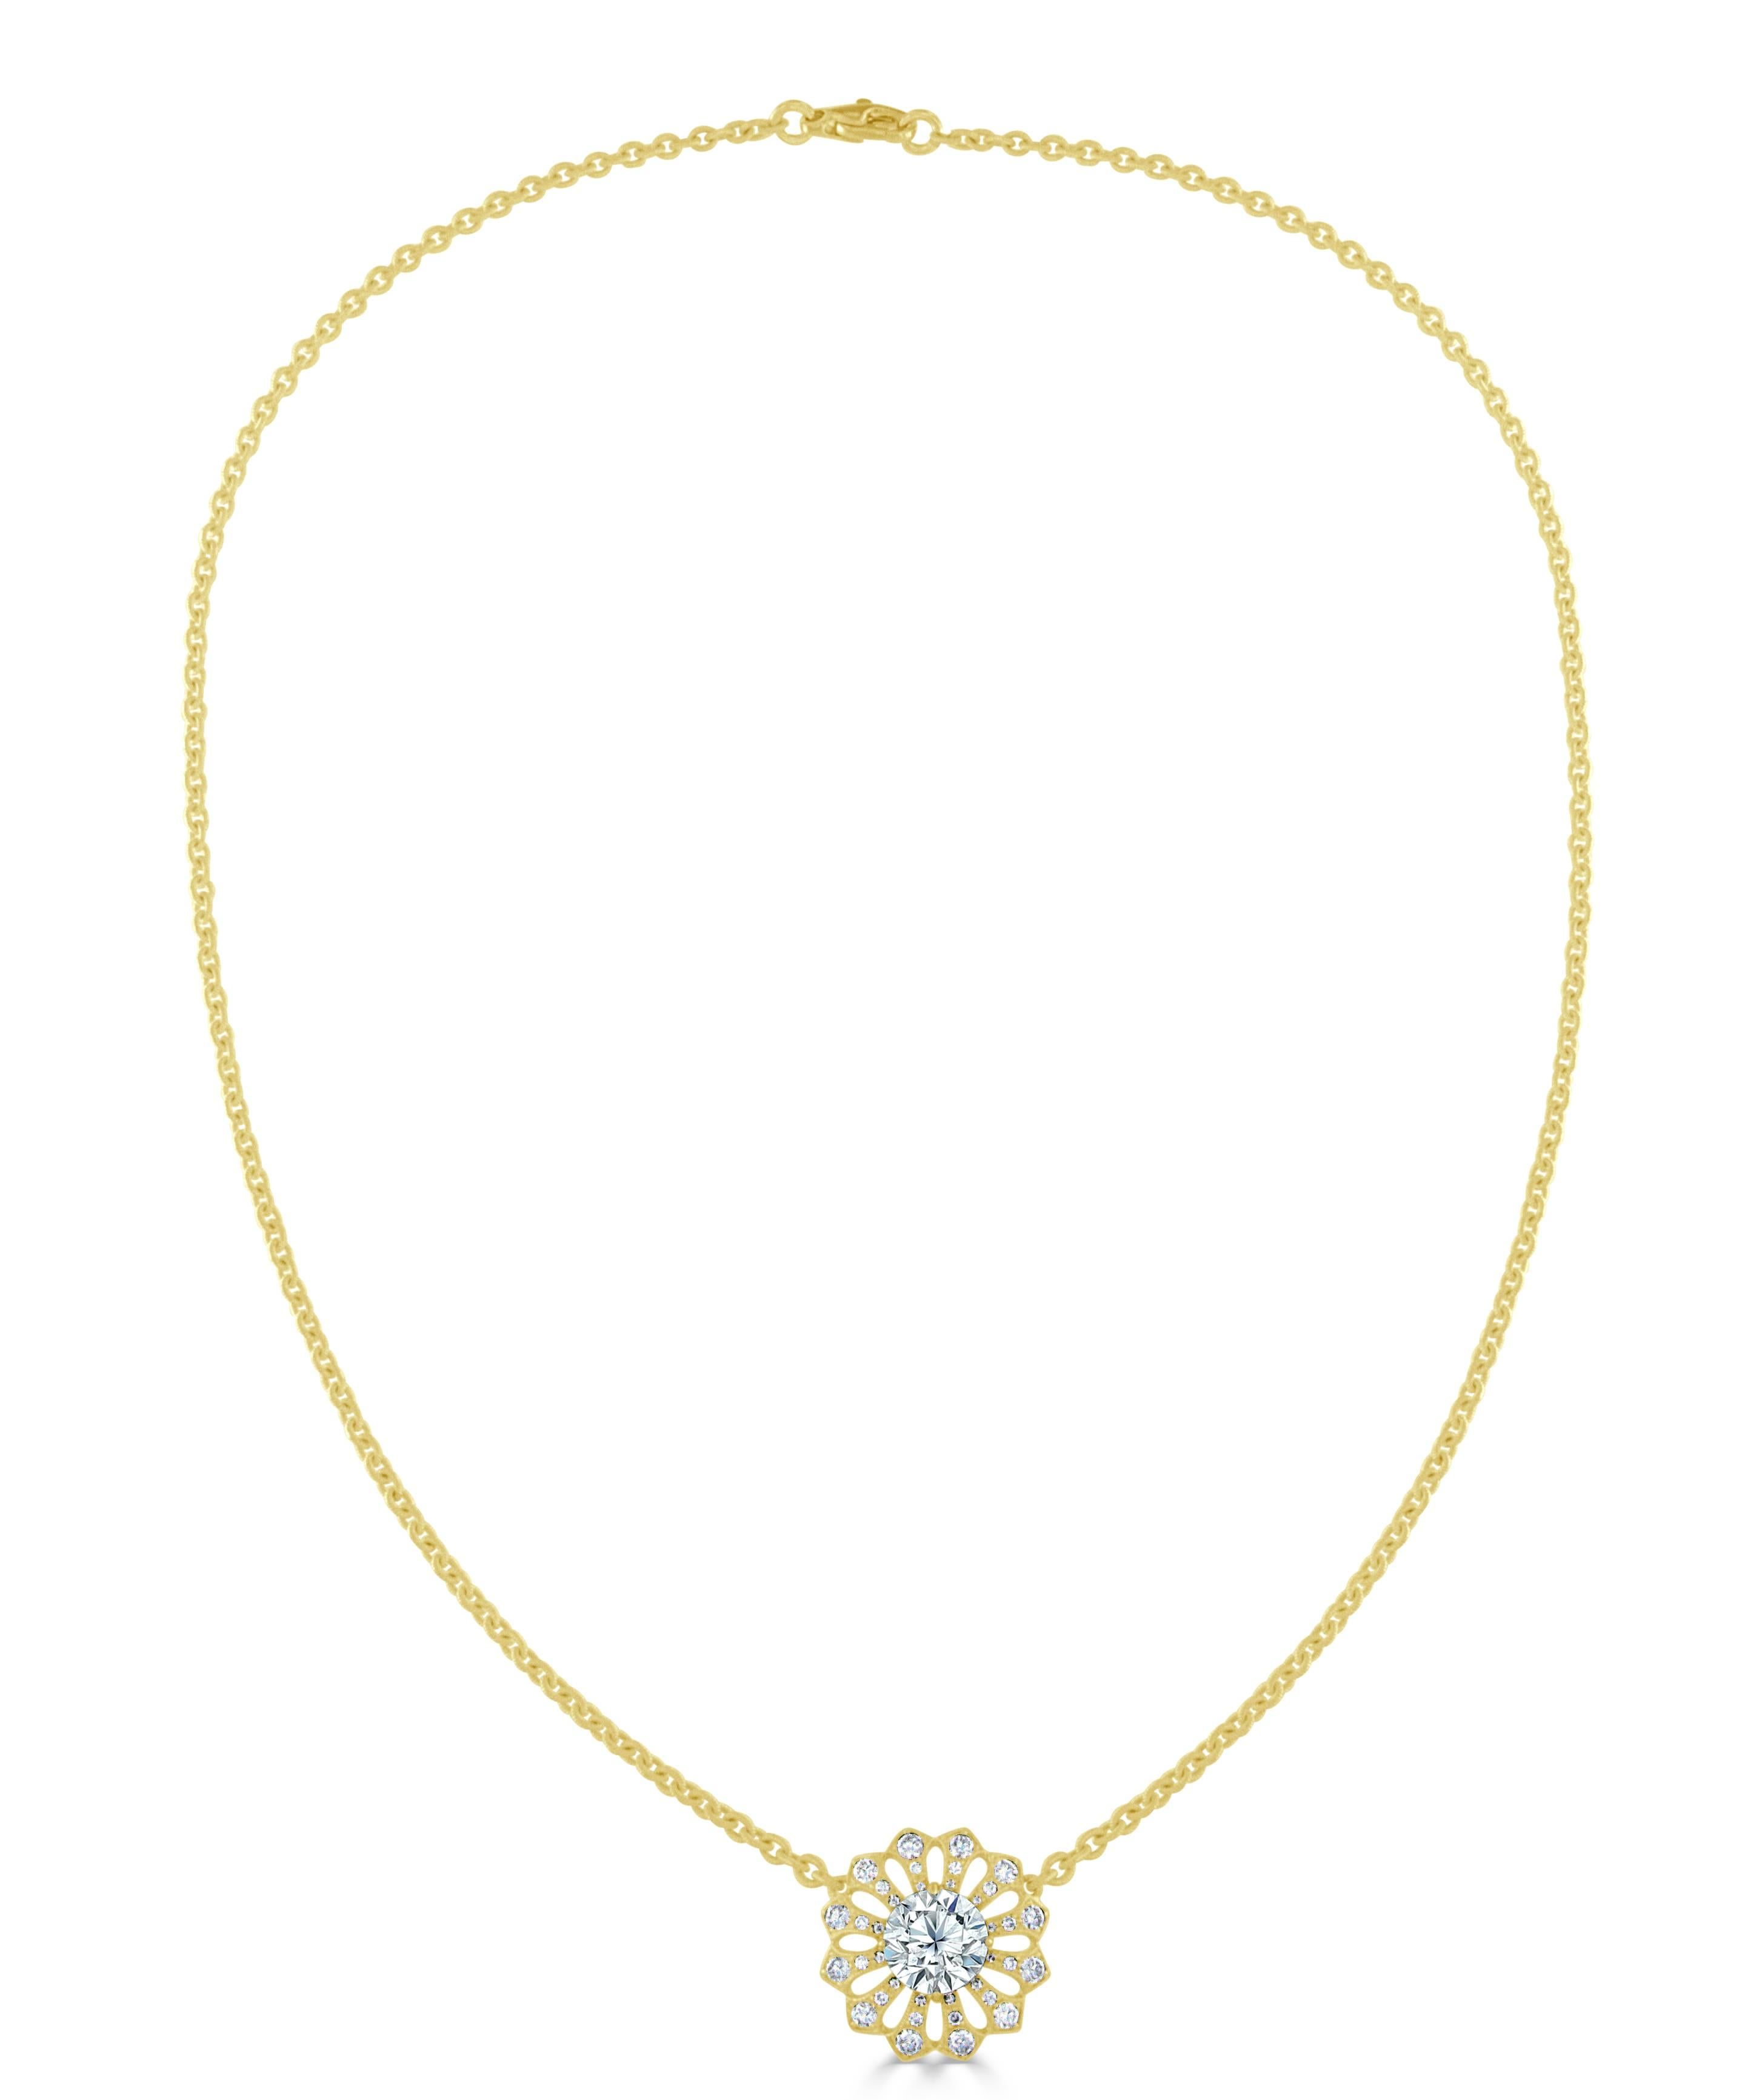 This delightful Bez Ambar designer diamond 18 karat yellow gold necklace has a beautiful floral motif resembling a sunflower. Featuring a delicately light brown GIA certified 2.40 carat round brilliant cut diamond, having very fine makes. The petals